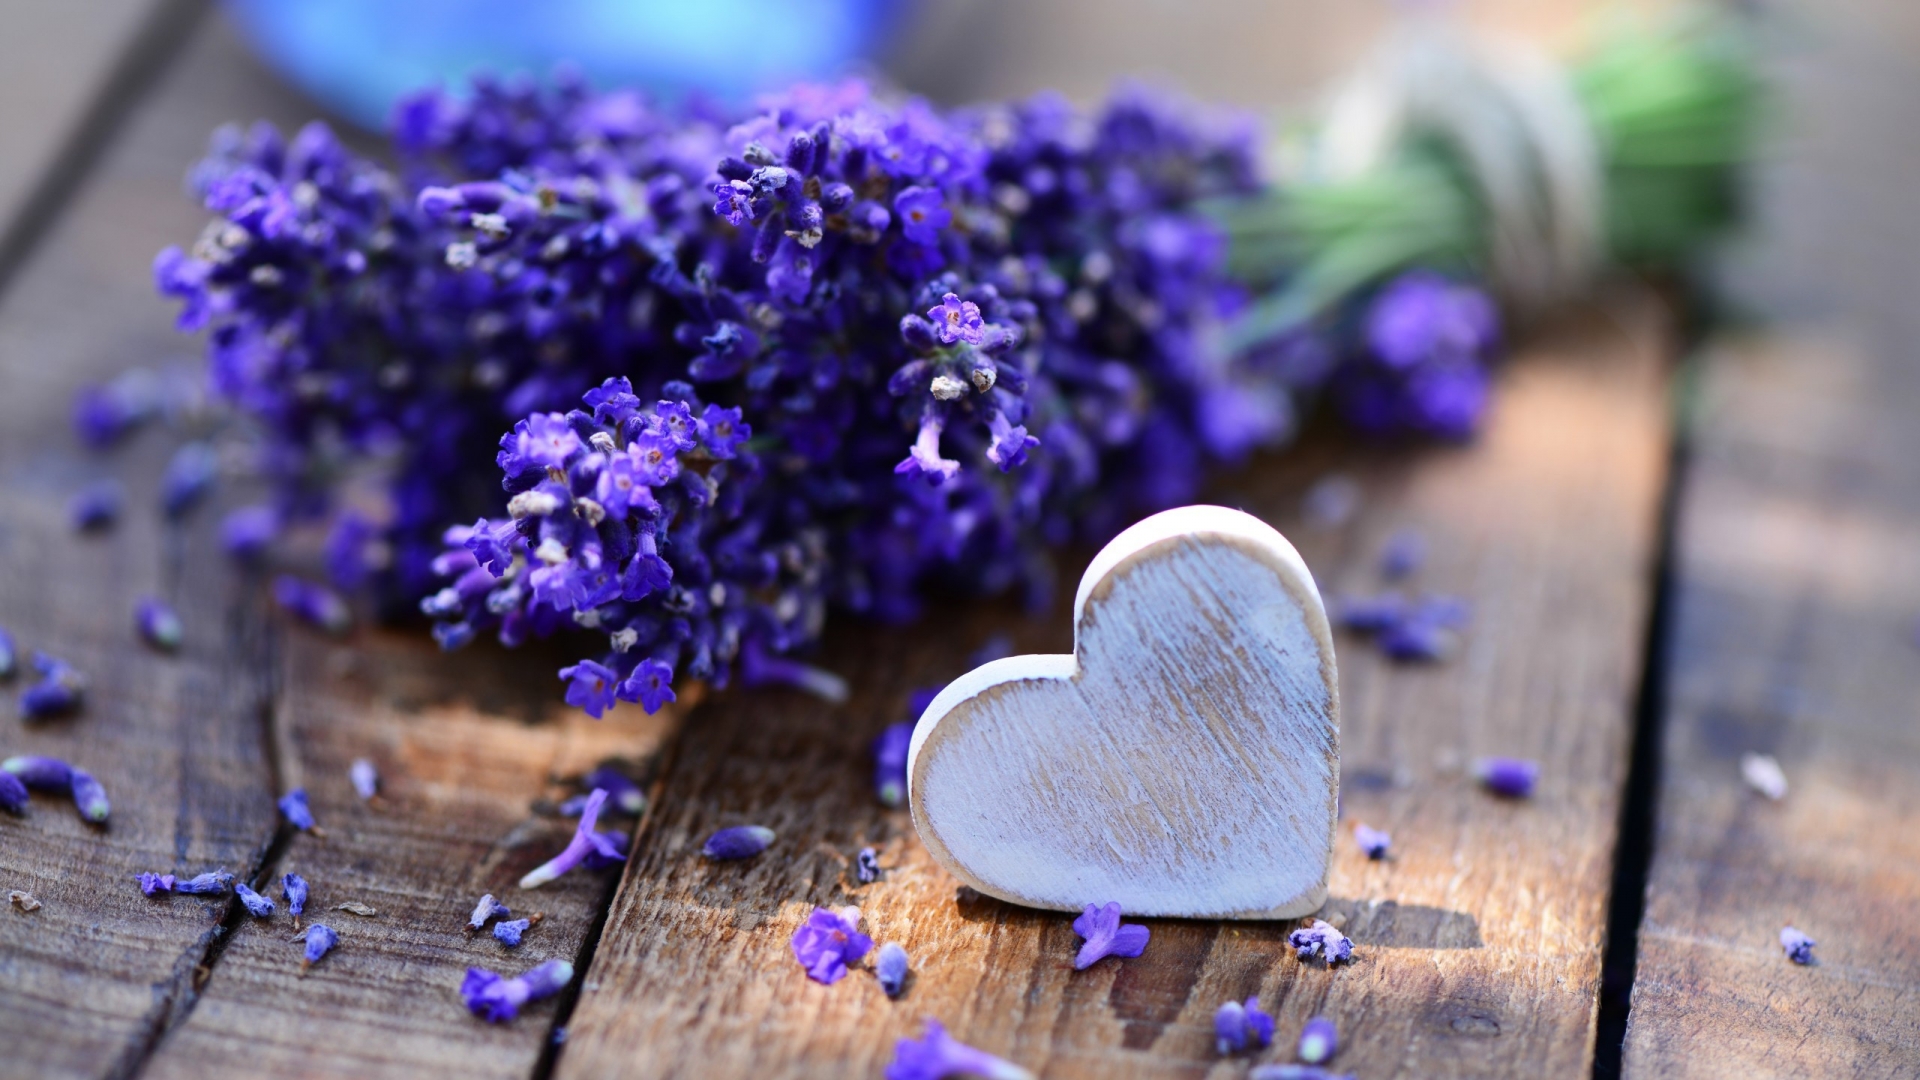 Lavender and Heart for 1920 x 1080 HDTV 1080p resolution